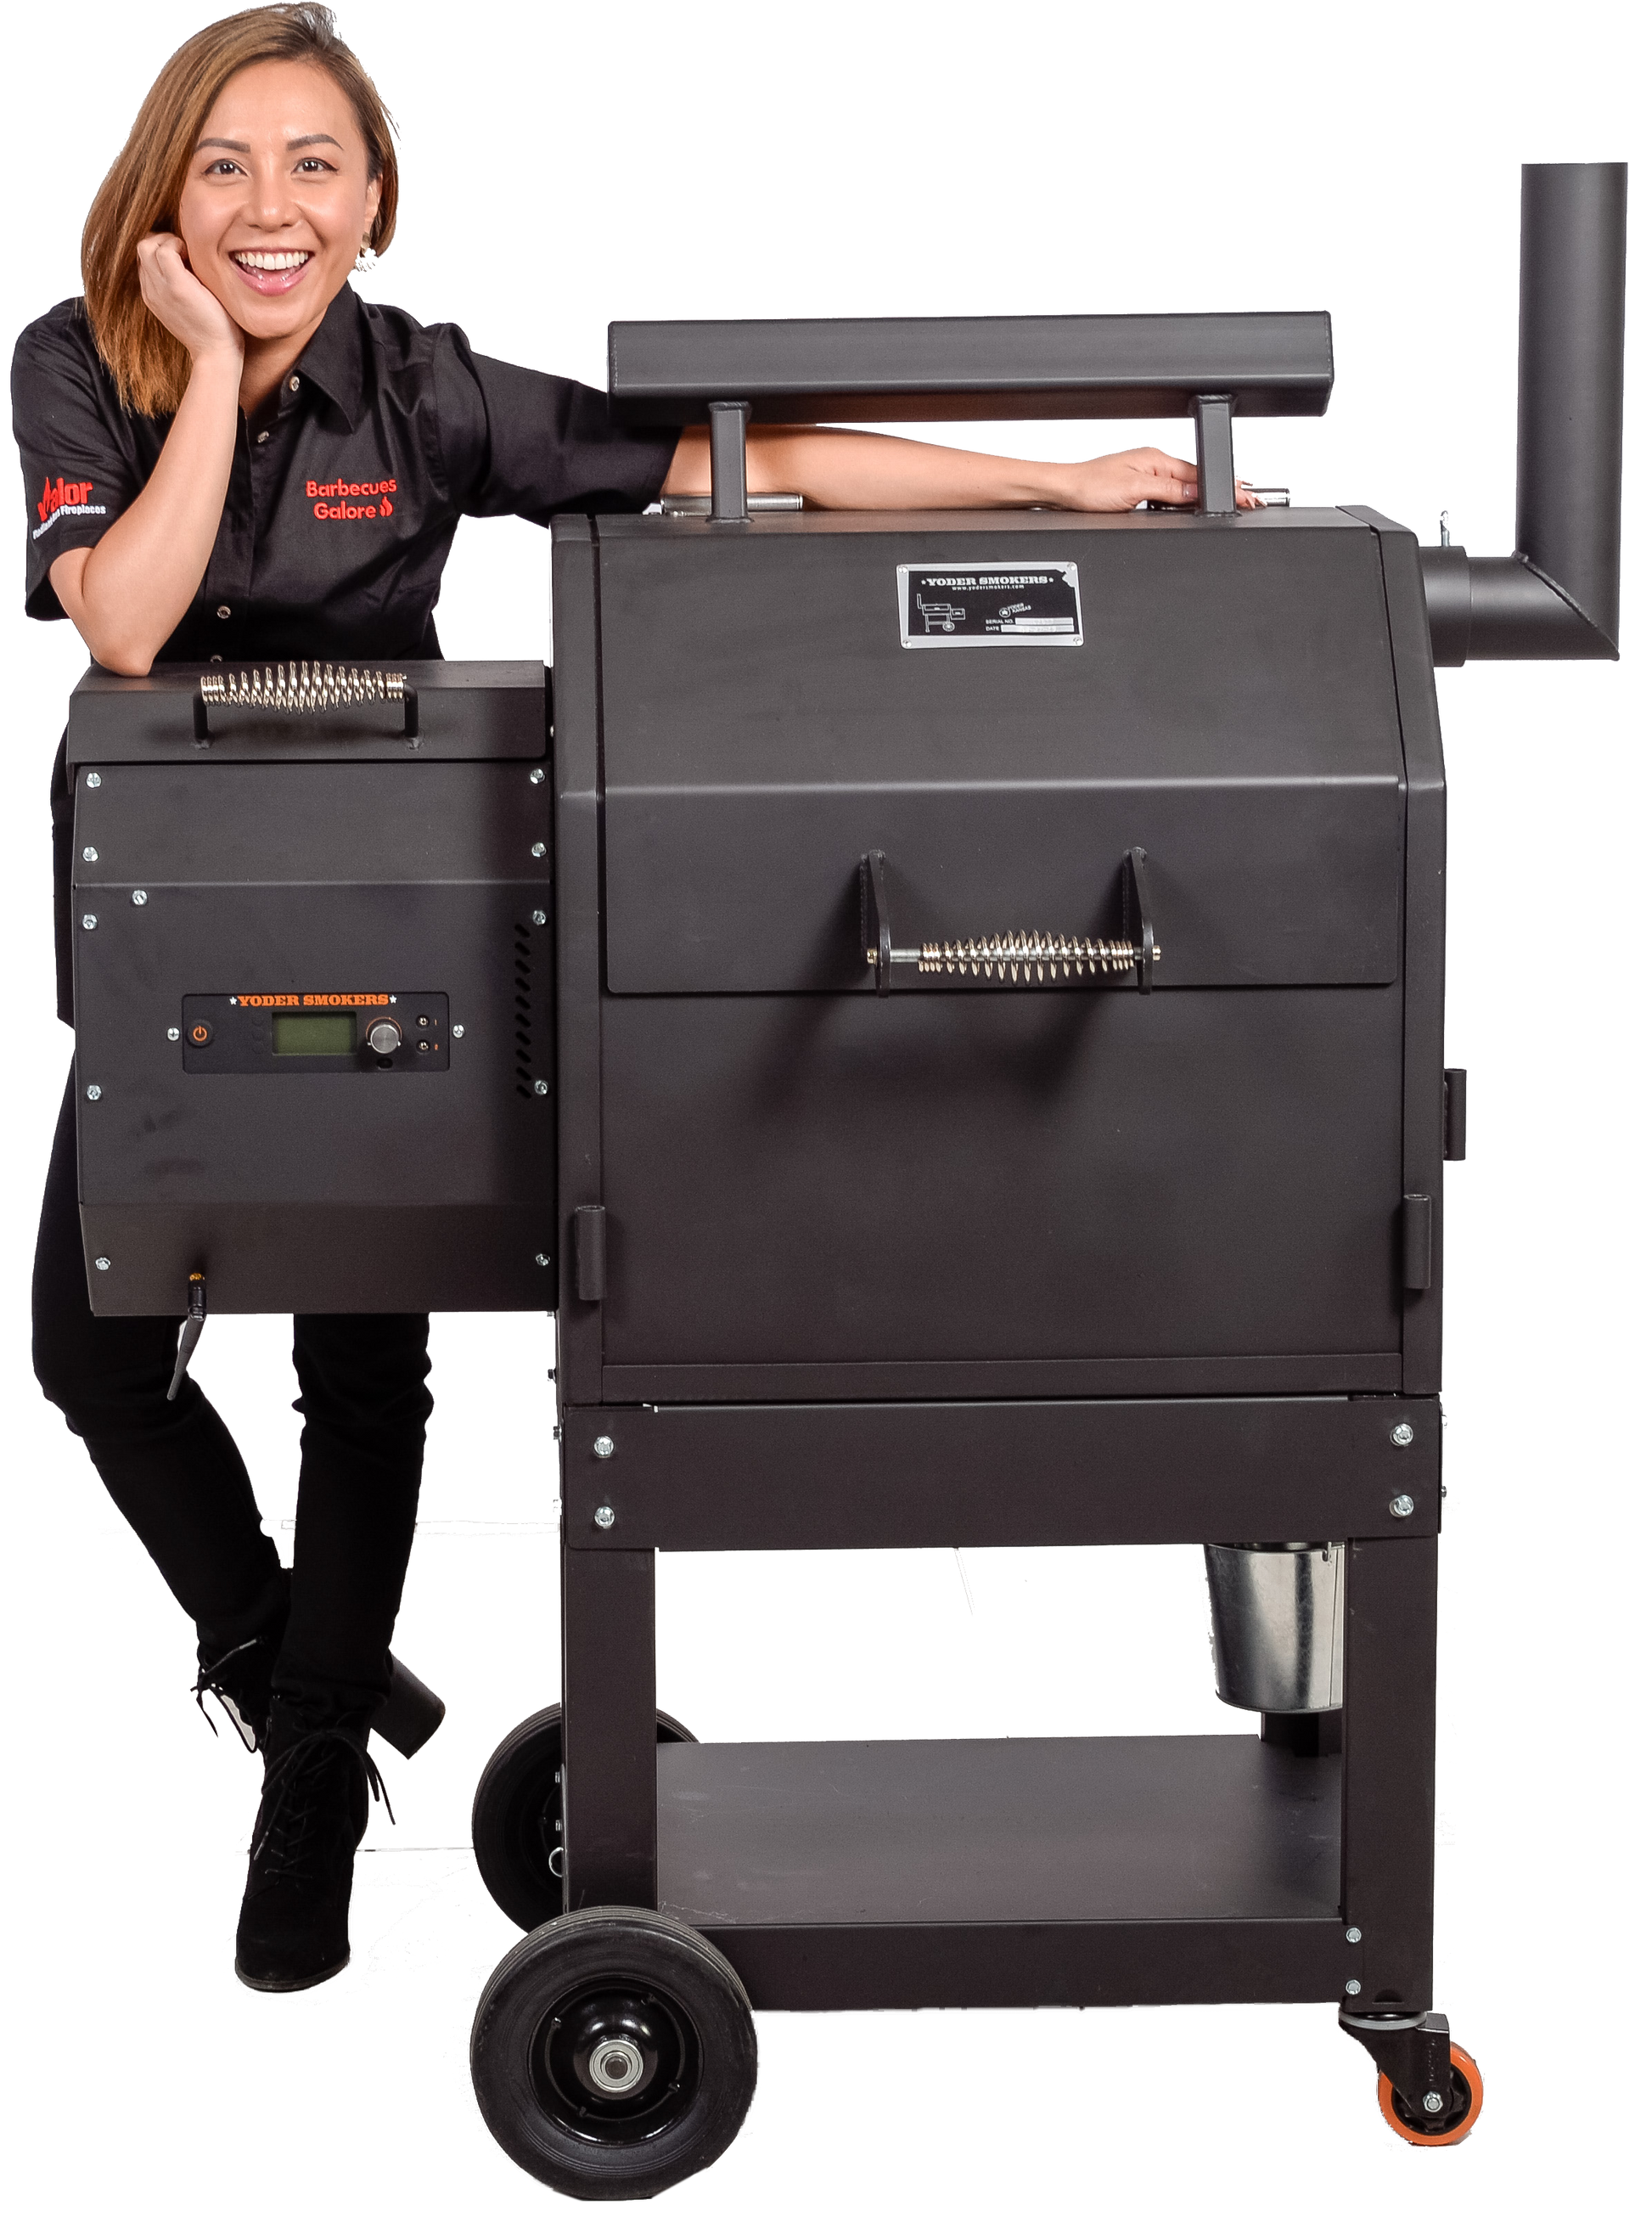 Yoder YS480s Standard Pellet Grill | The Yoders are here! And we’ll be yodelling their name all summer long | Barbecues Galore: Etobicoke, Burlington, Oakville & Calgary